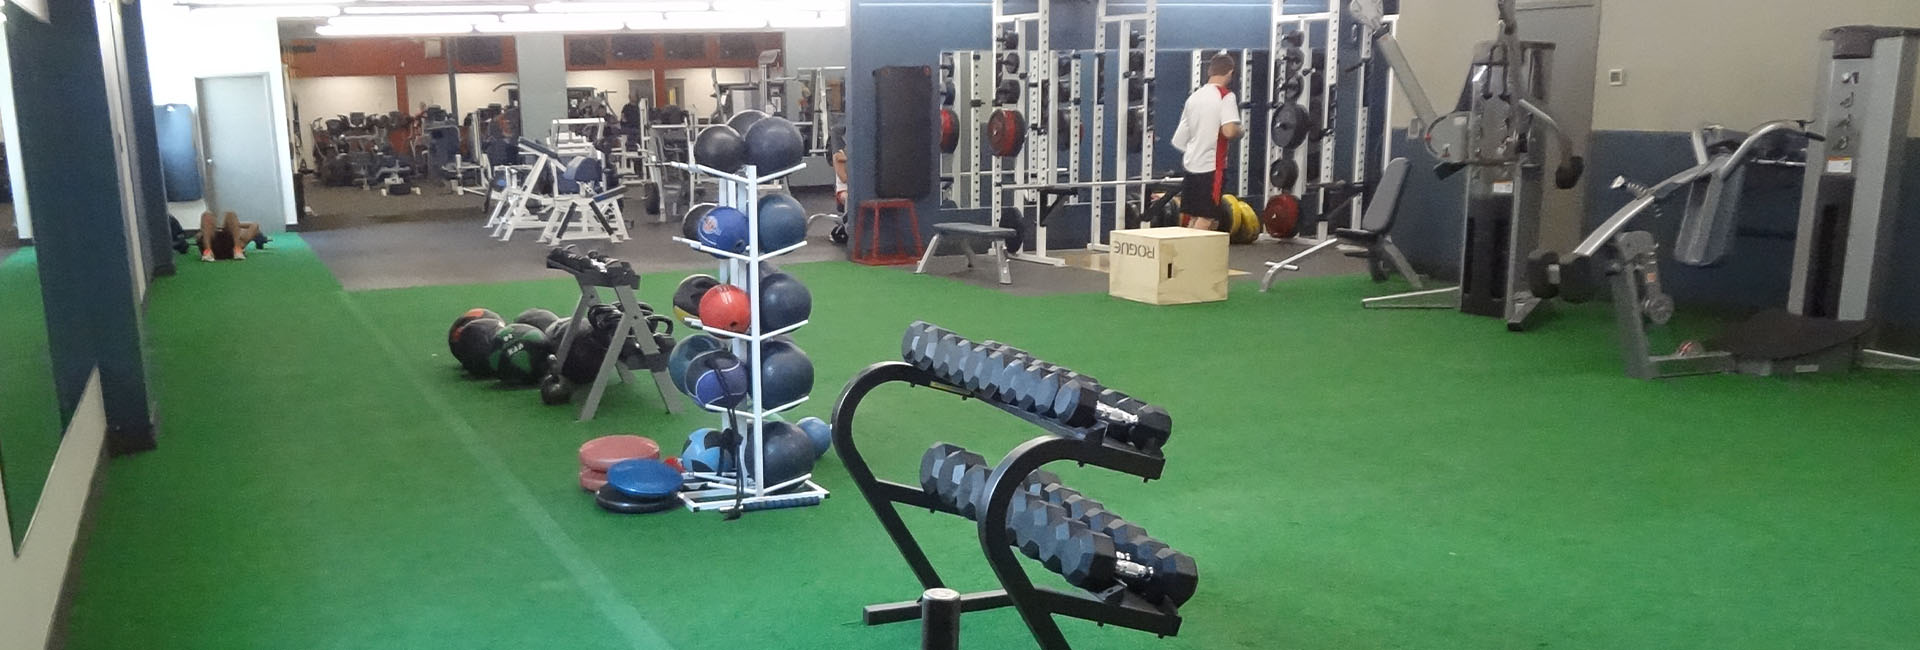 functional training area with gym equipment and a turf floor